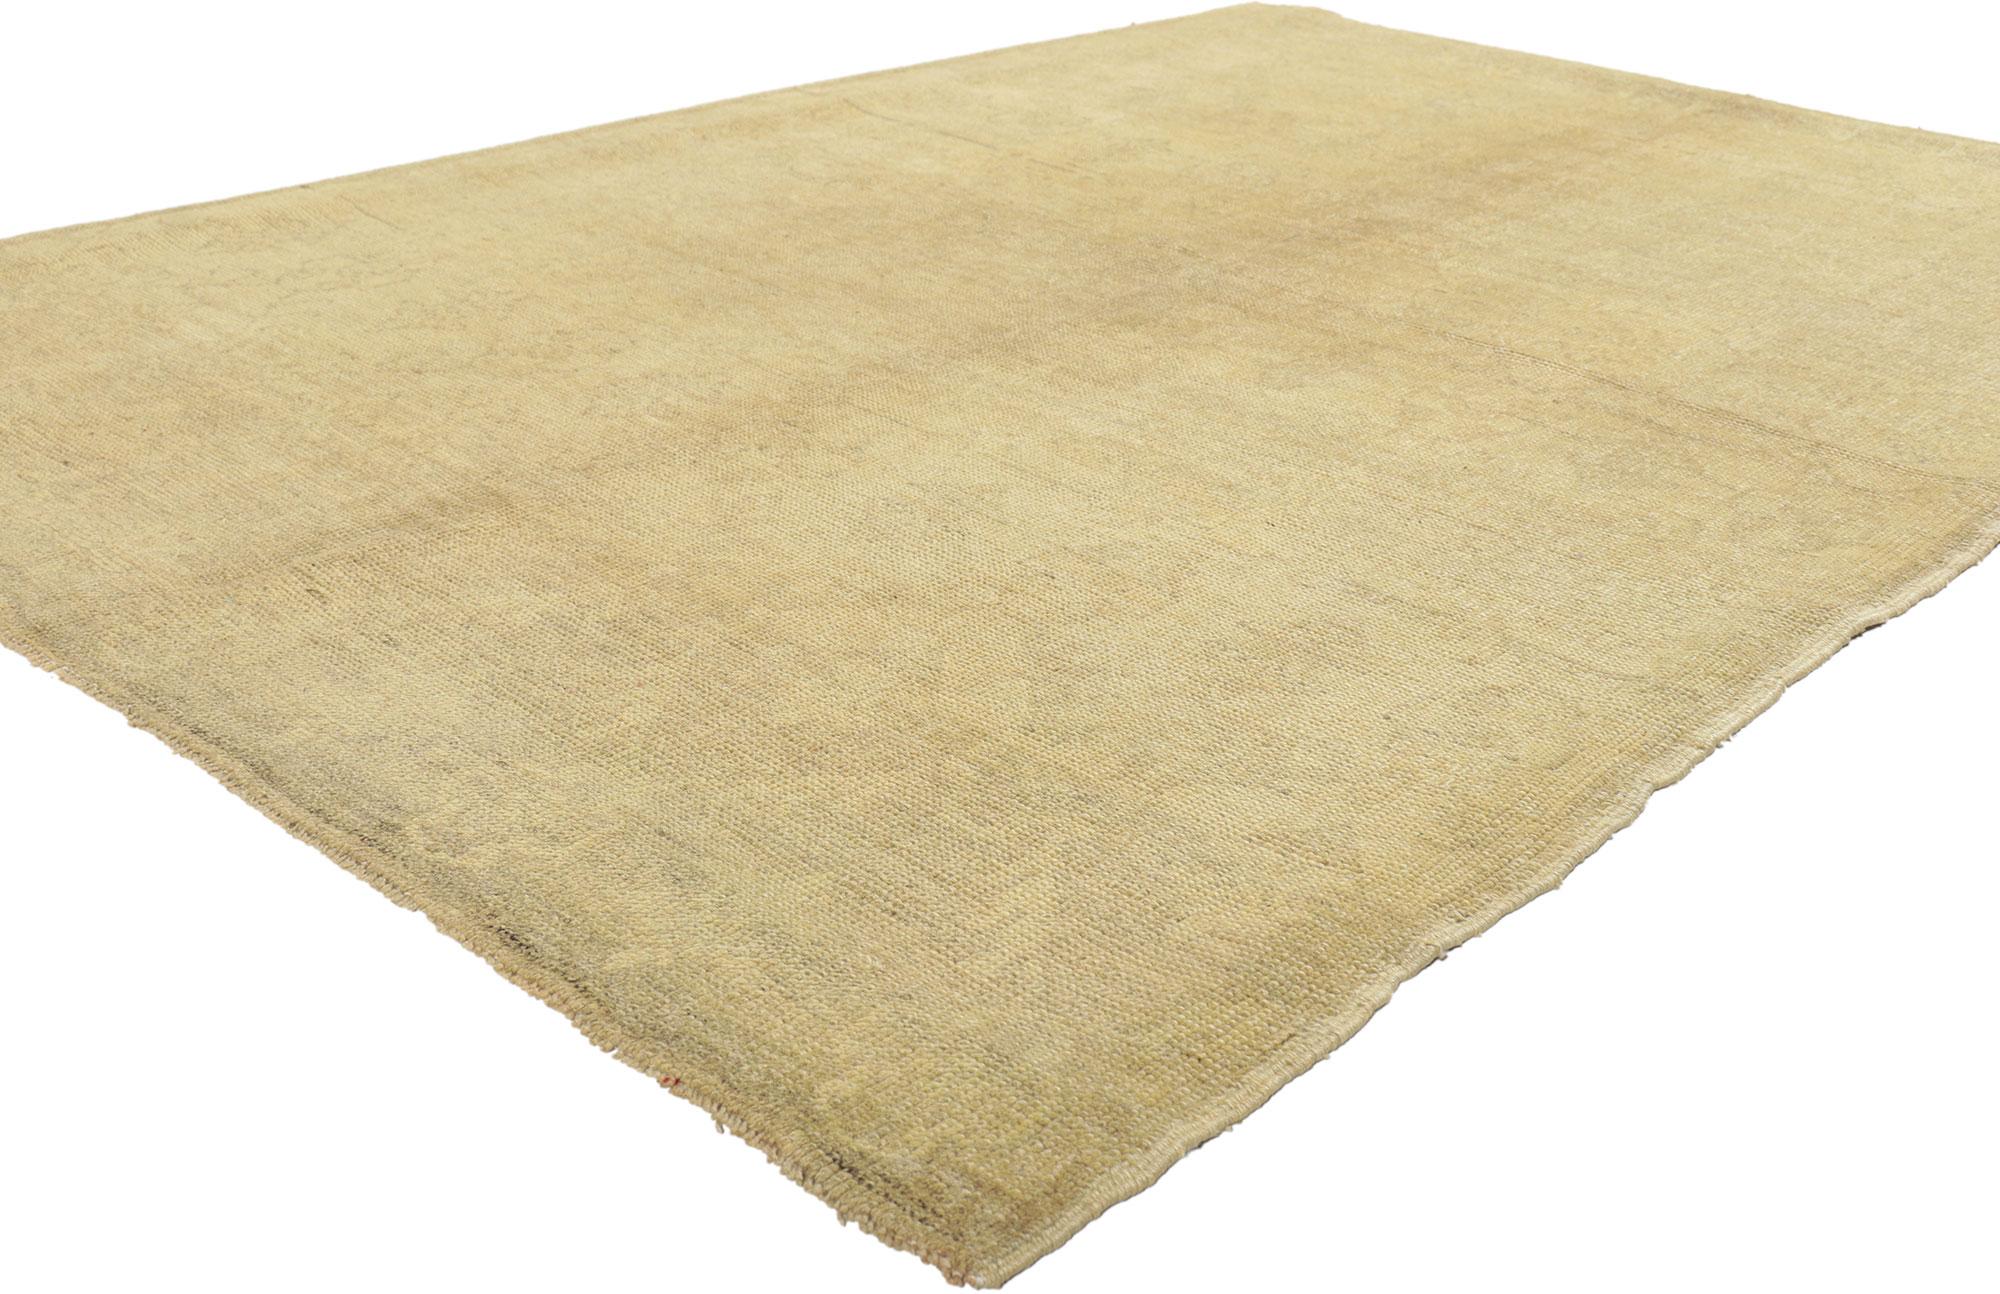 51027 Vintage Turkish Oushak Rug, 04'09 X 07'02. 
Warm and inviting with simplistic style, this hand knotted wool vintage Turkish Oushak rug is a captivating vision of woven beauty. The faded allover pattern and muted earth-tone colors woven into